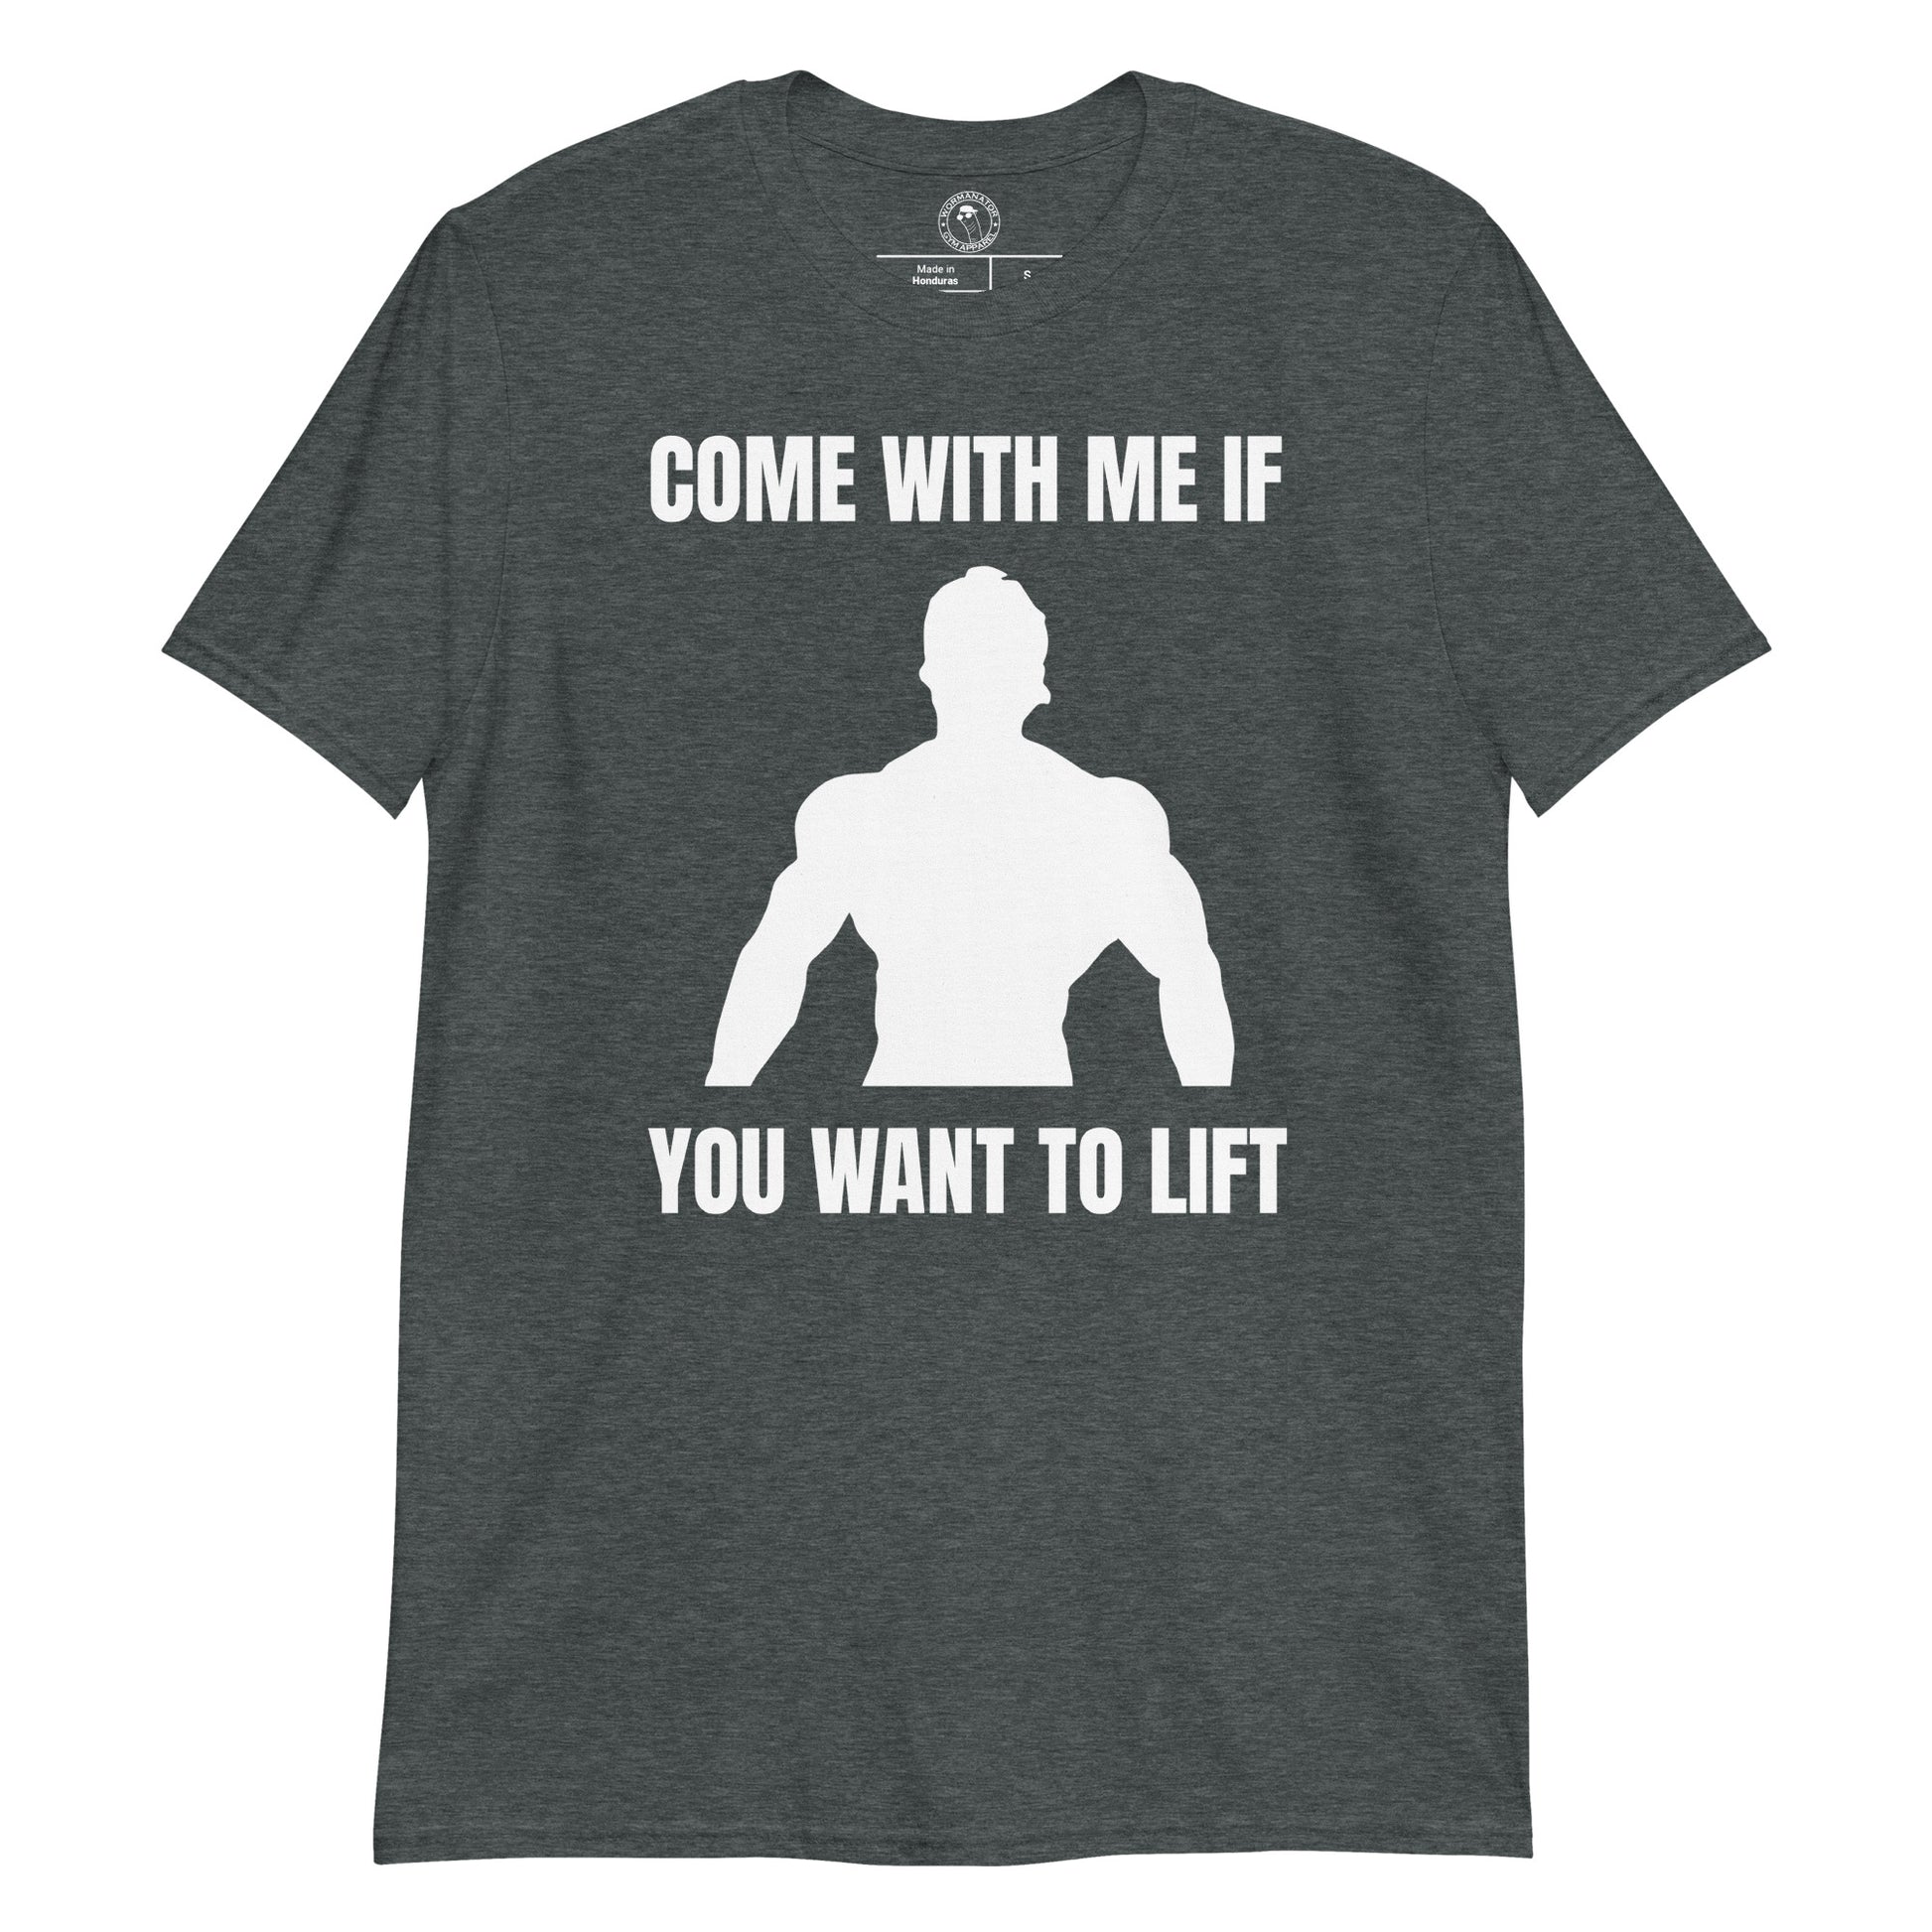 Come with Me if You Want to Lift Shirt in Dark Heather